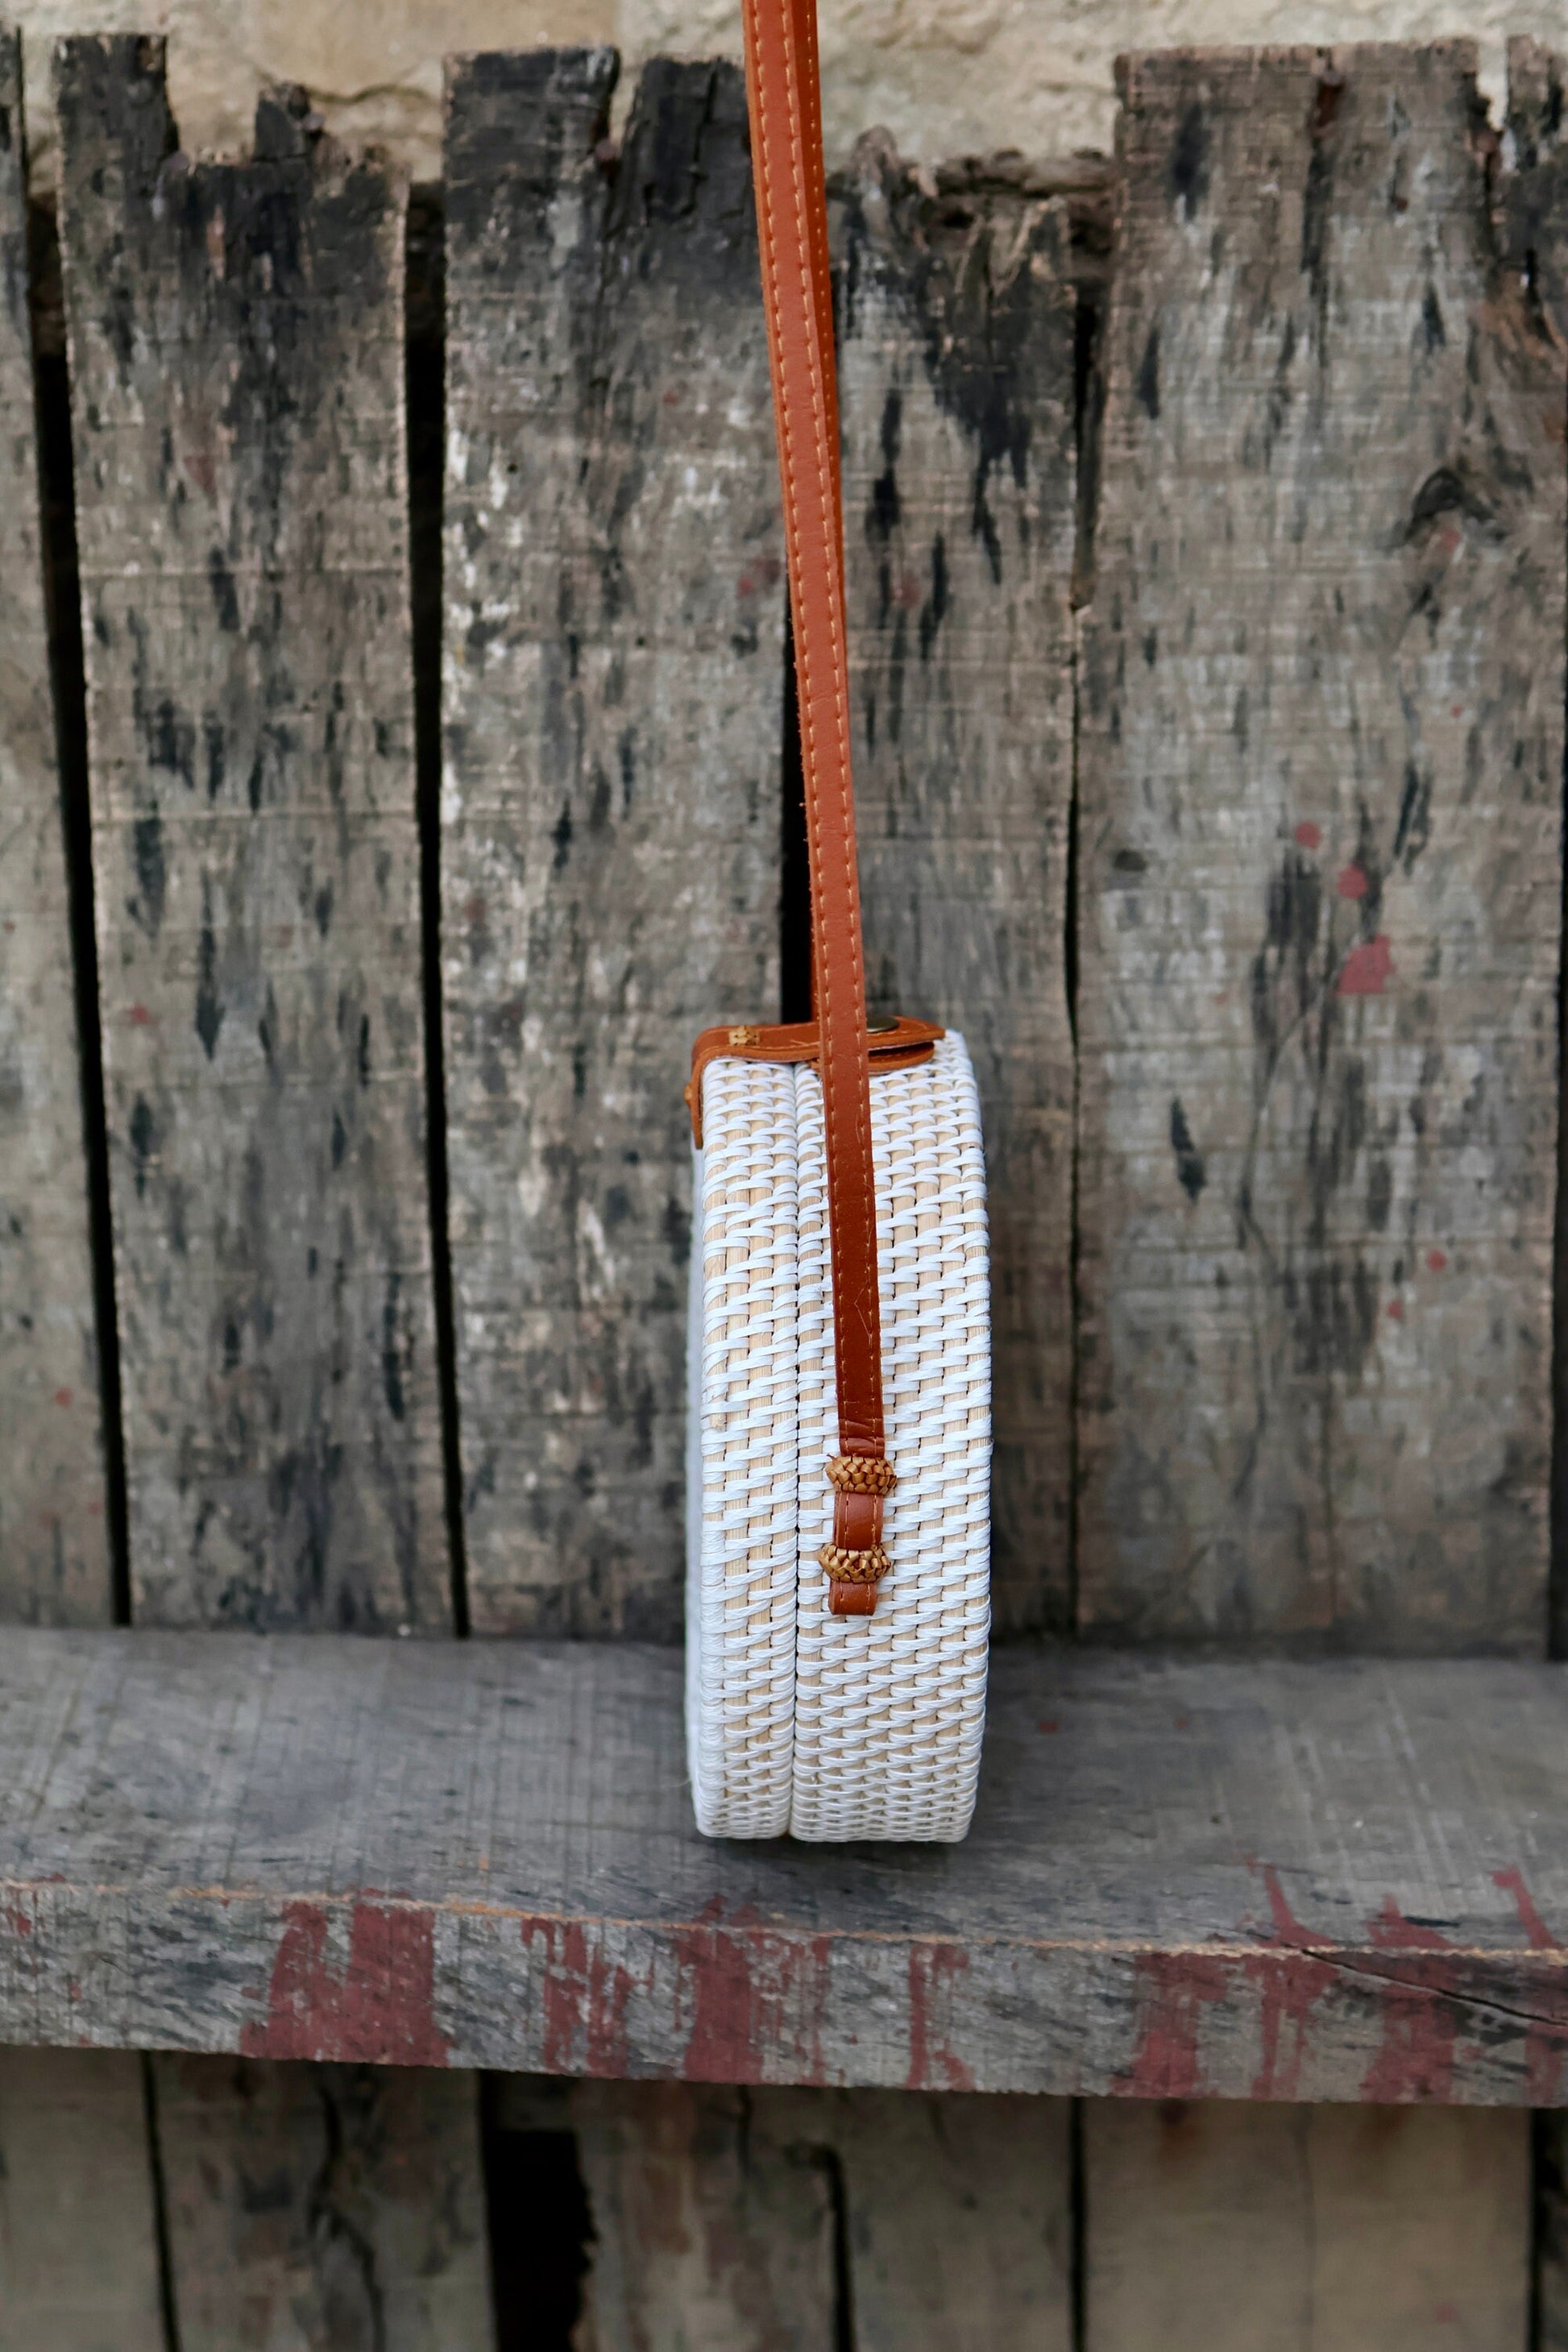 Round Rattan Bag with Flower Weaving, Bali Bag Handwoven Crossbody Purse, Braided Straw Bag, Bali Sling Bags, Rattan Bags, Gift for her